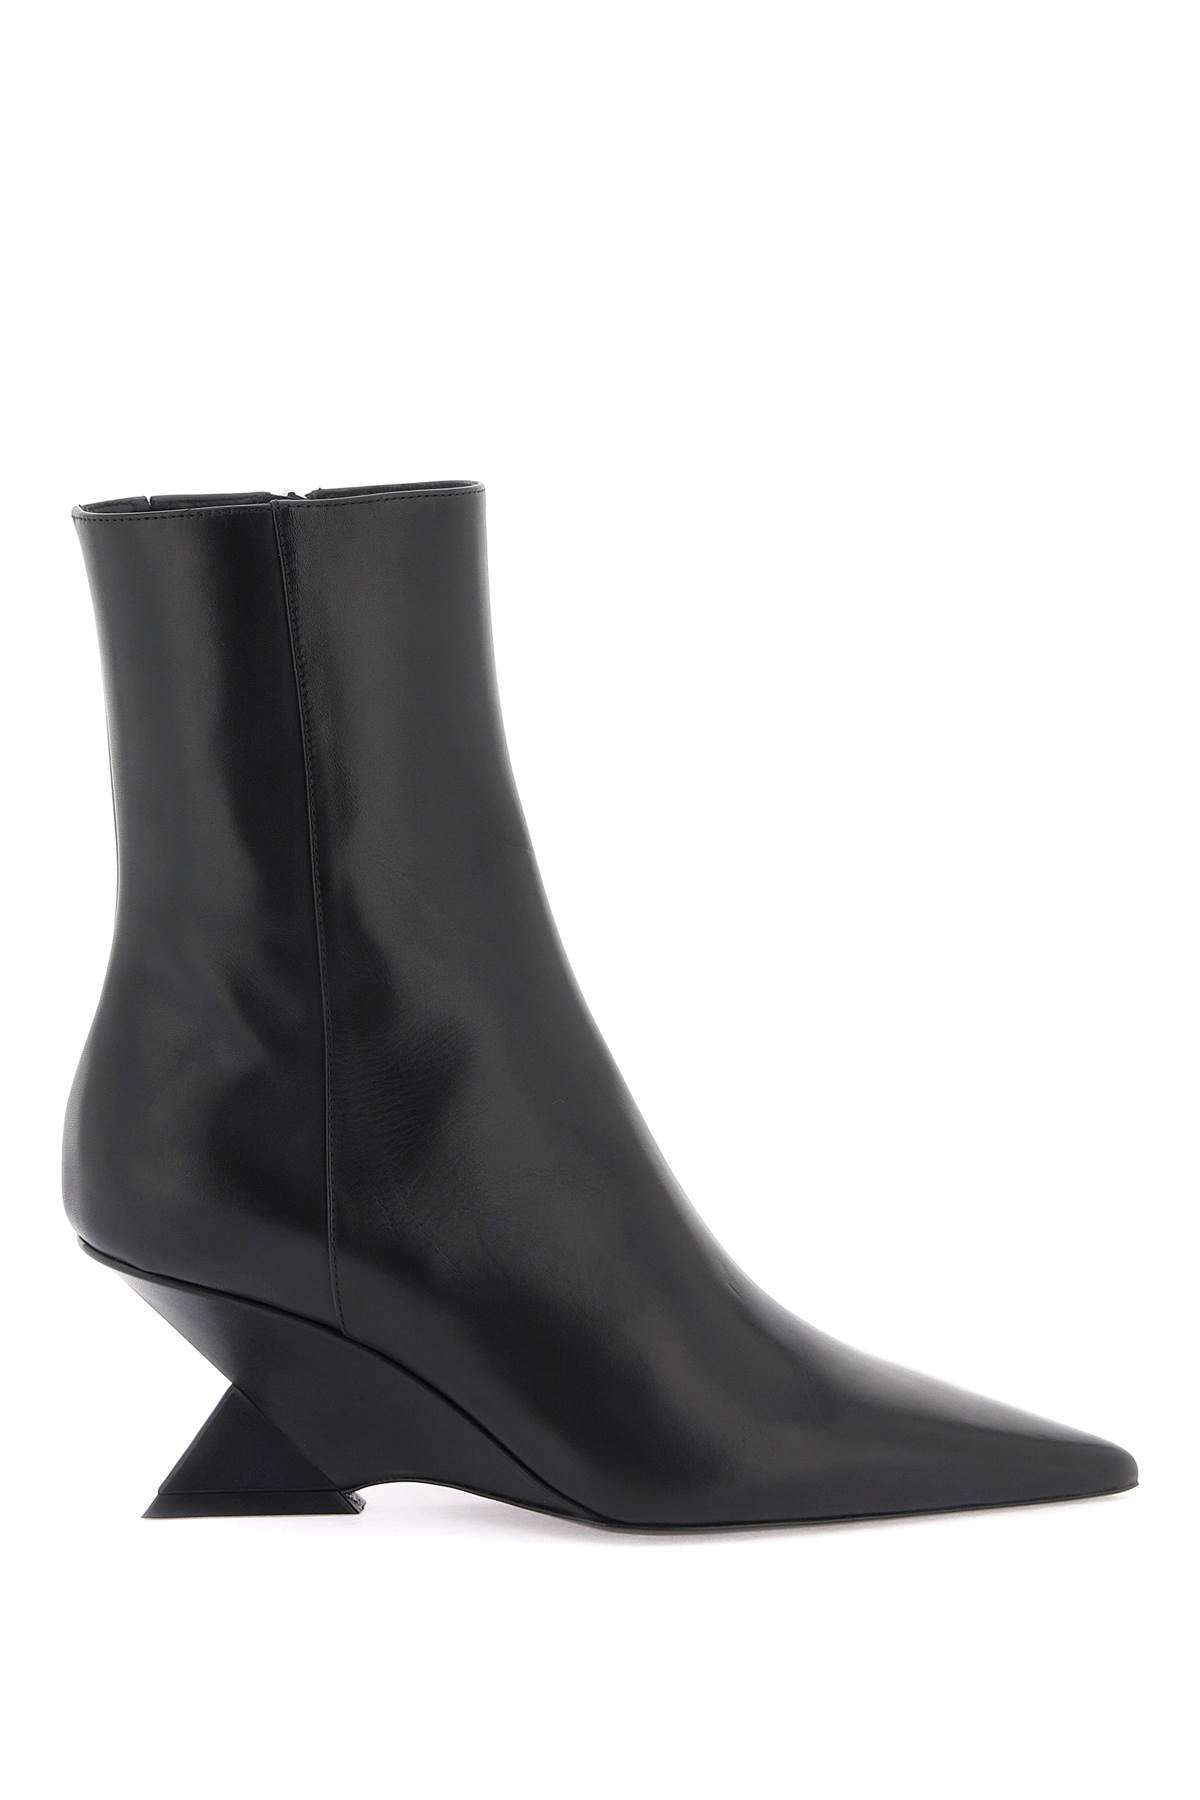 The Attico 'Cheope' Ankle Boots Women